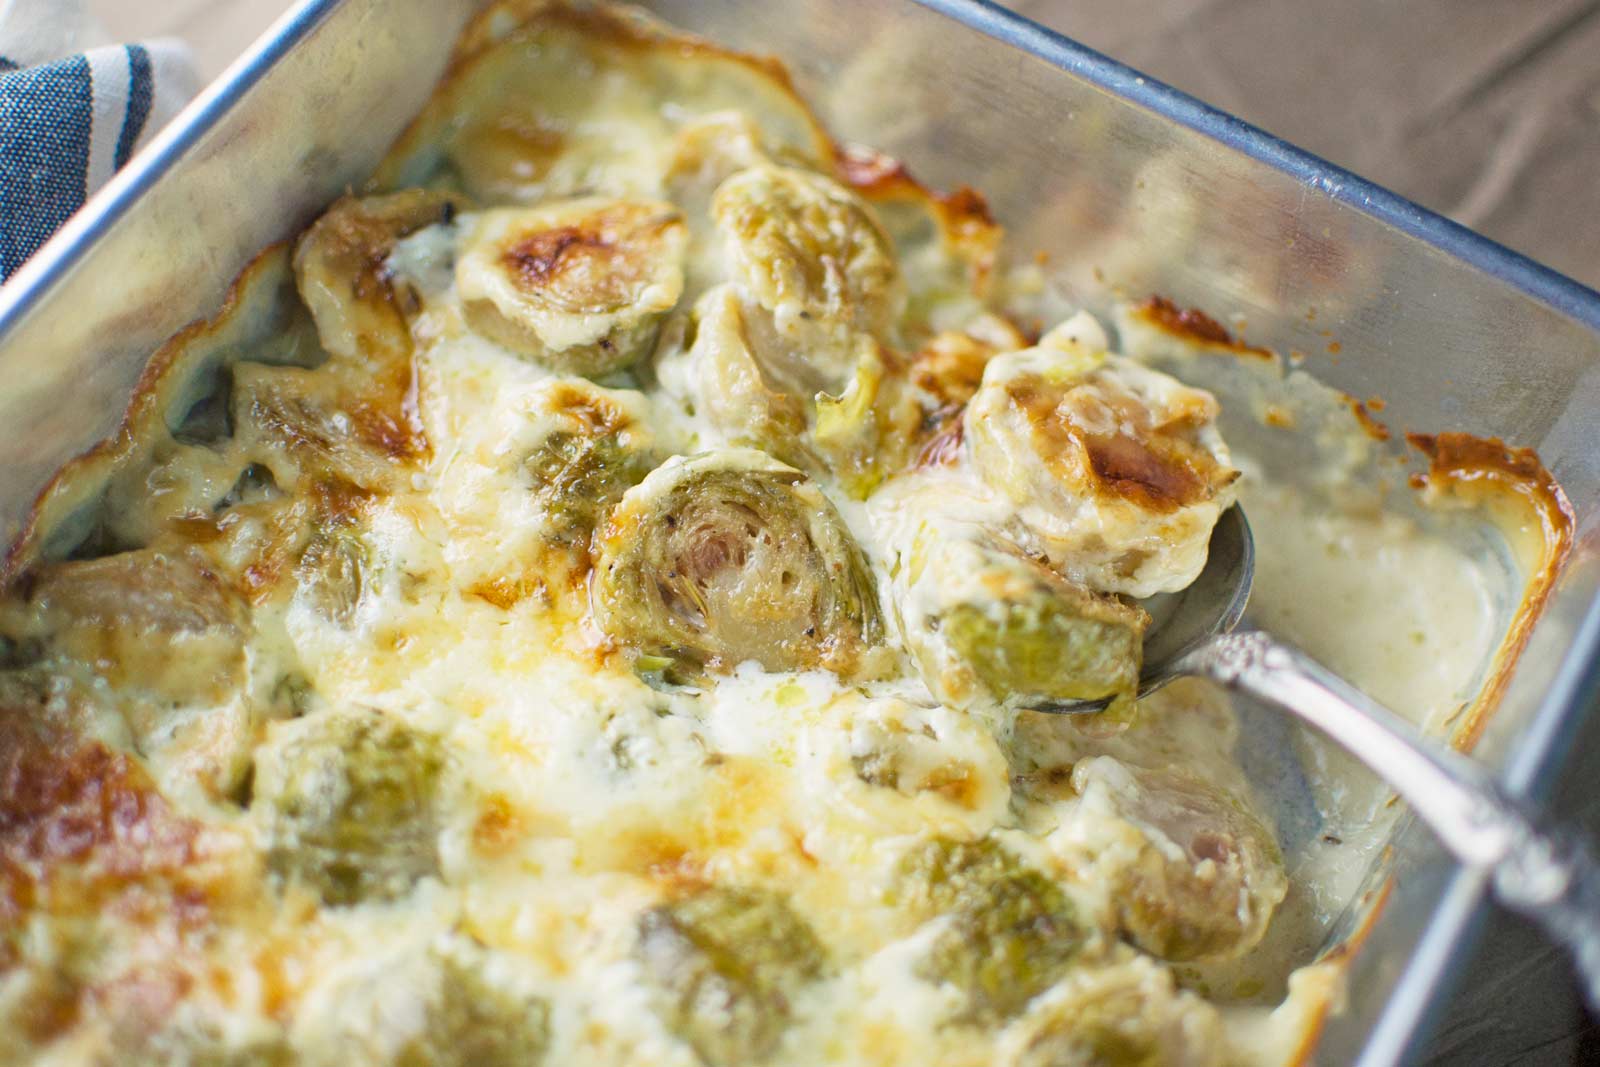 Creamy Brussel Sprouts Au Gratin - the perfect side dish for a simple weeknight dinner or during the Holidays for Thanksgiving, Christmas or New Year's! - Recipe @LittleFiggyFood